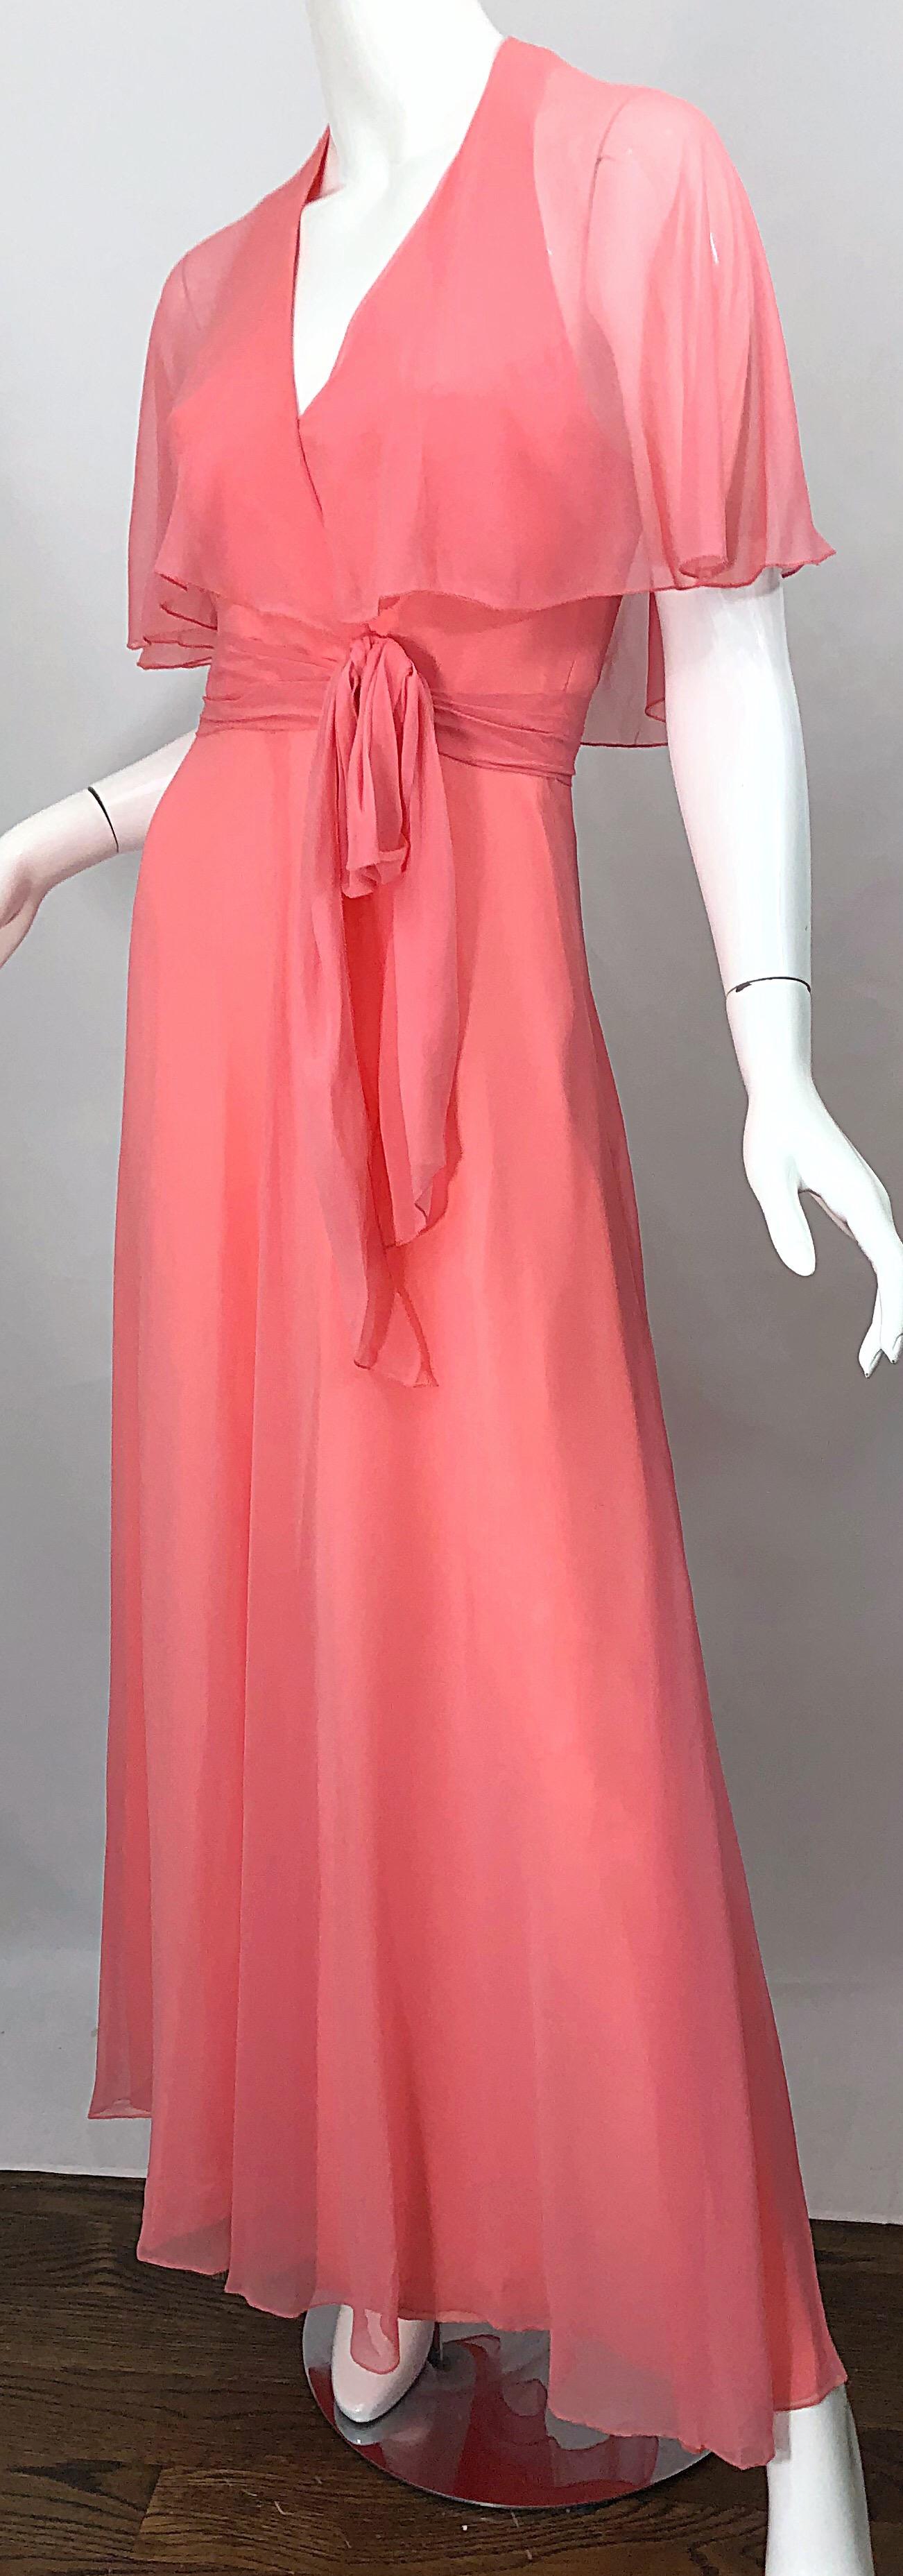 1970s Coral Pink Silk Chiffon Halter Sheer Caplet Vintage 70s Maxi Dress Gown For Sale 3